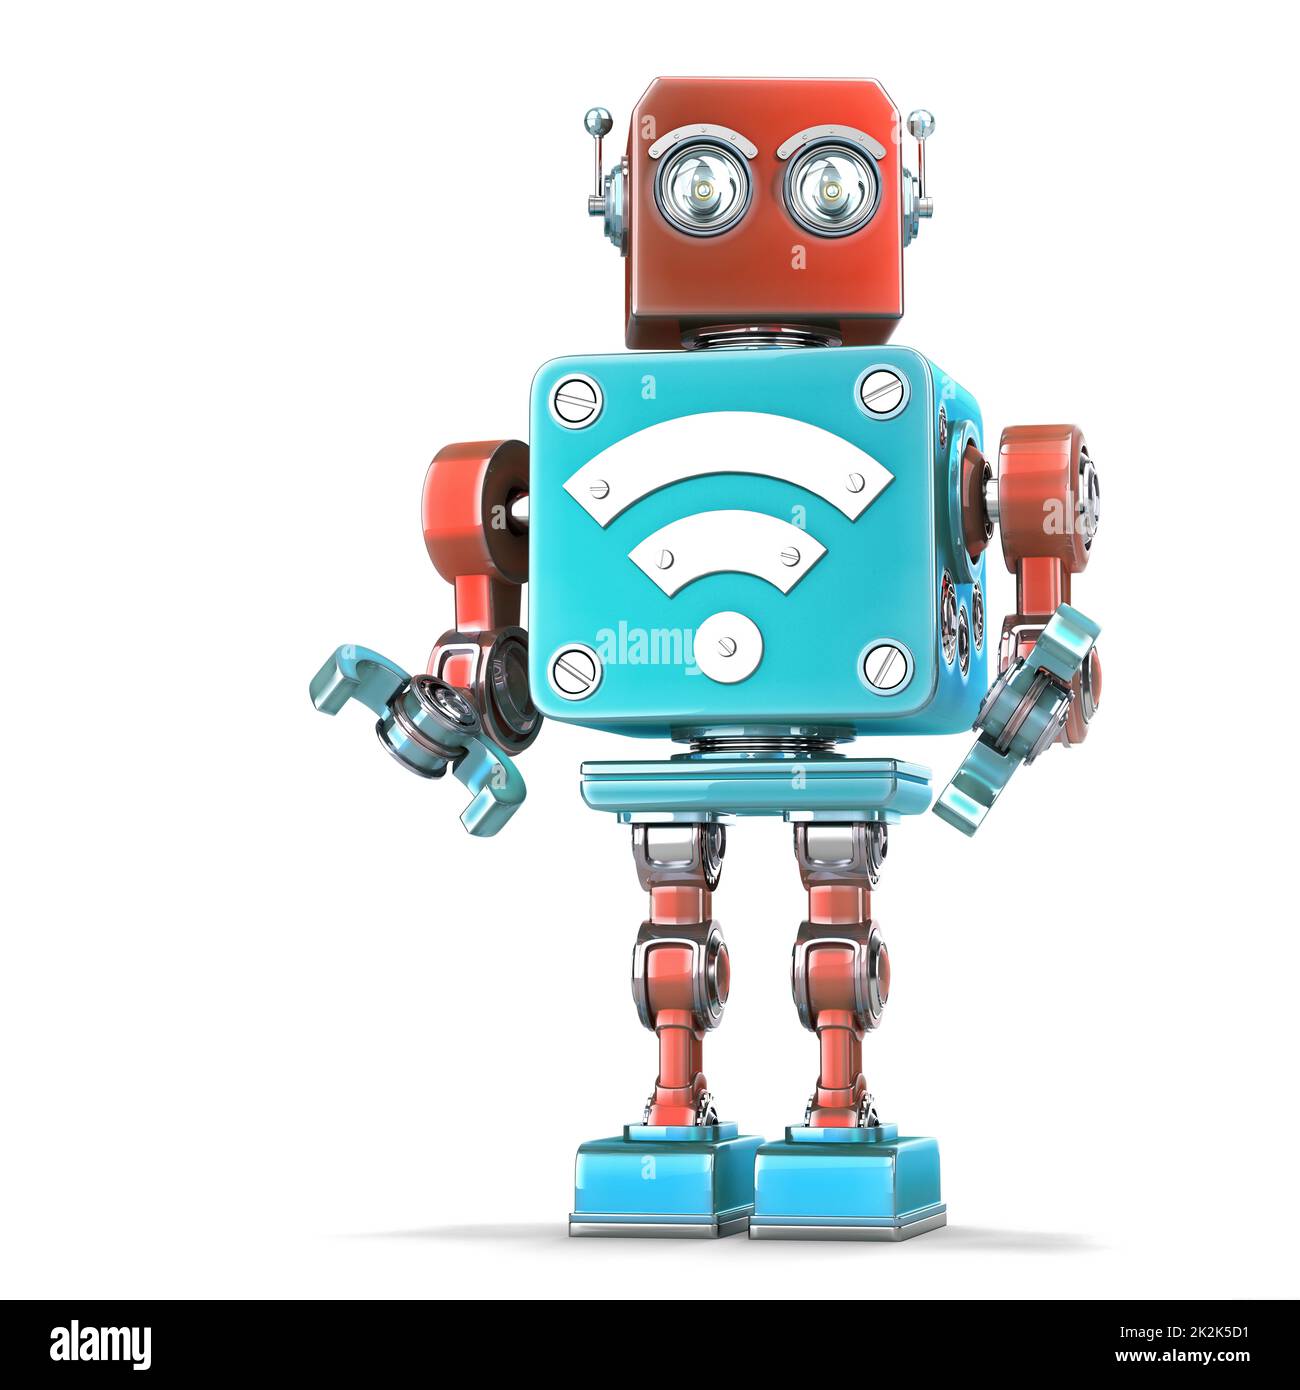 Vintage robot with Wi-Fi sign. Technology concept. Isloated. Contains clipping path Stock Photo